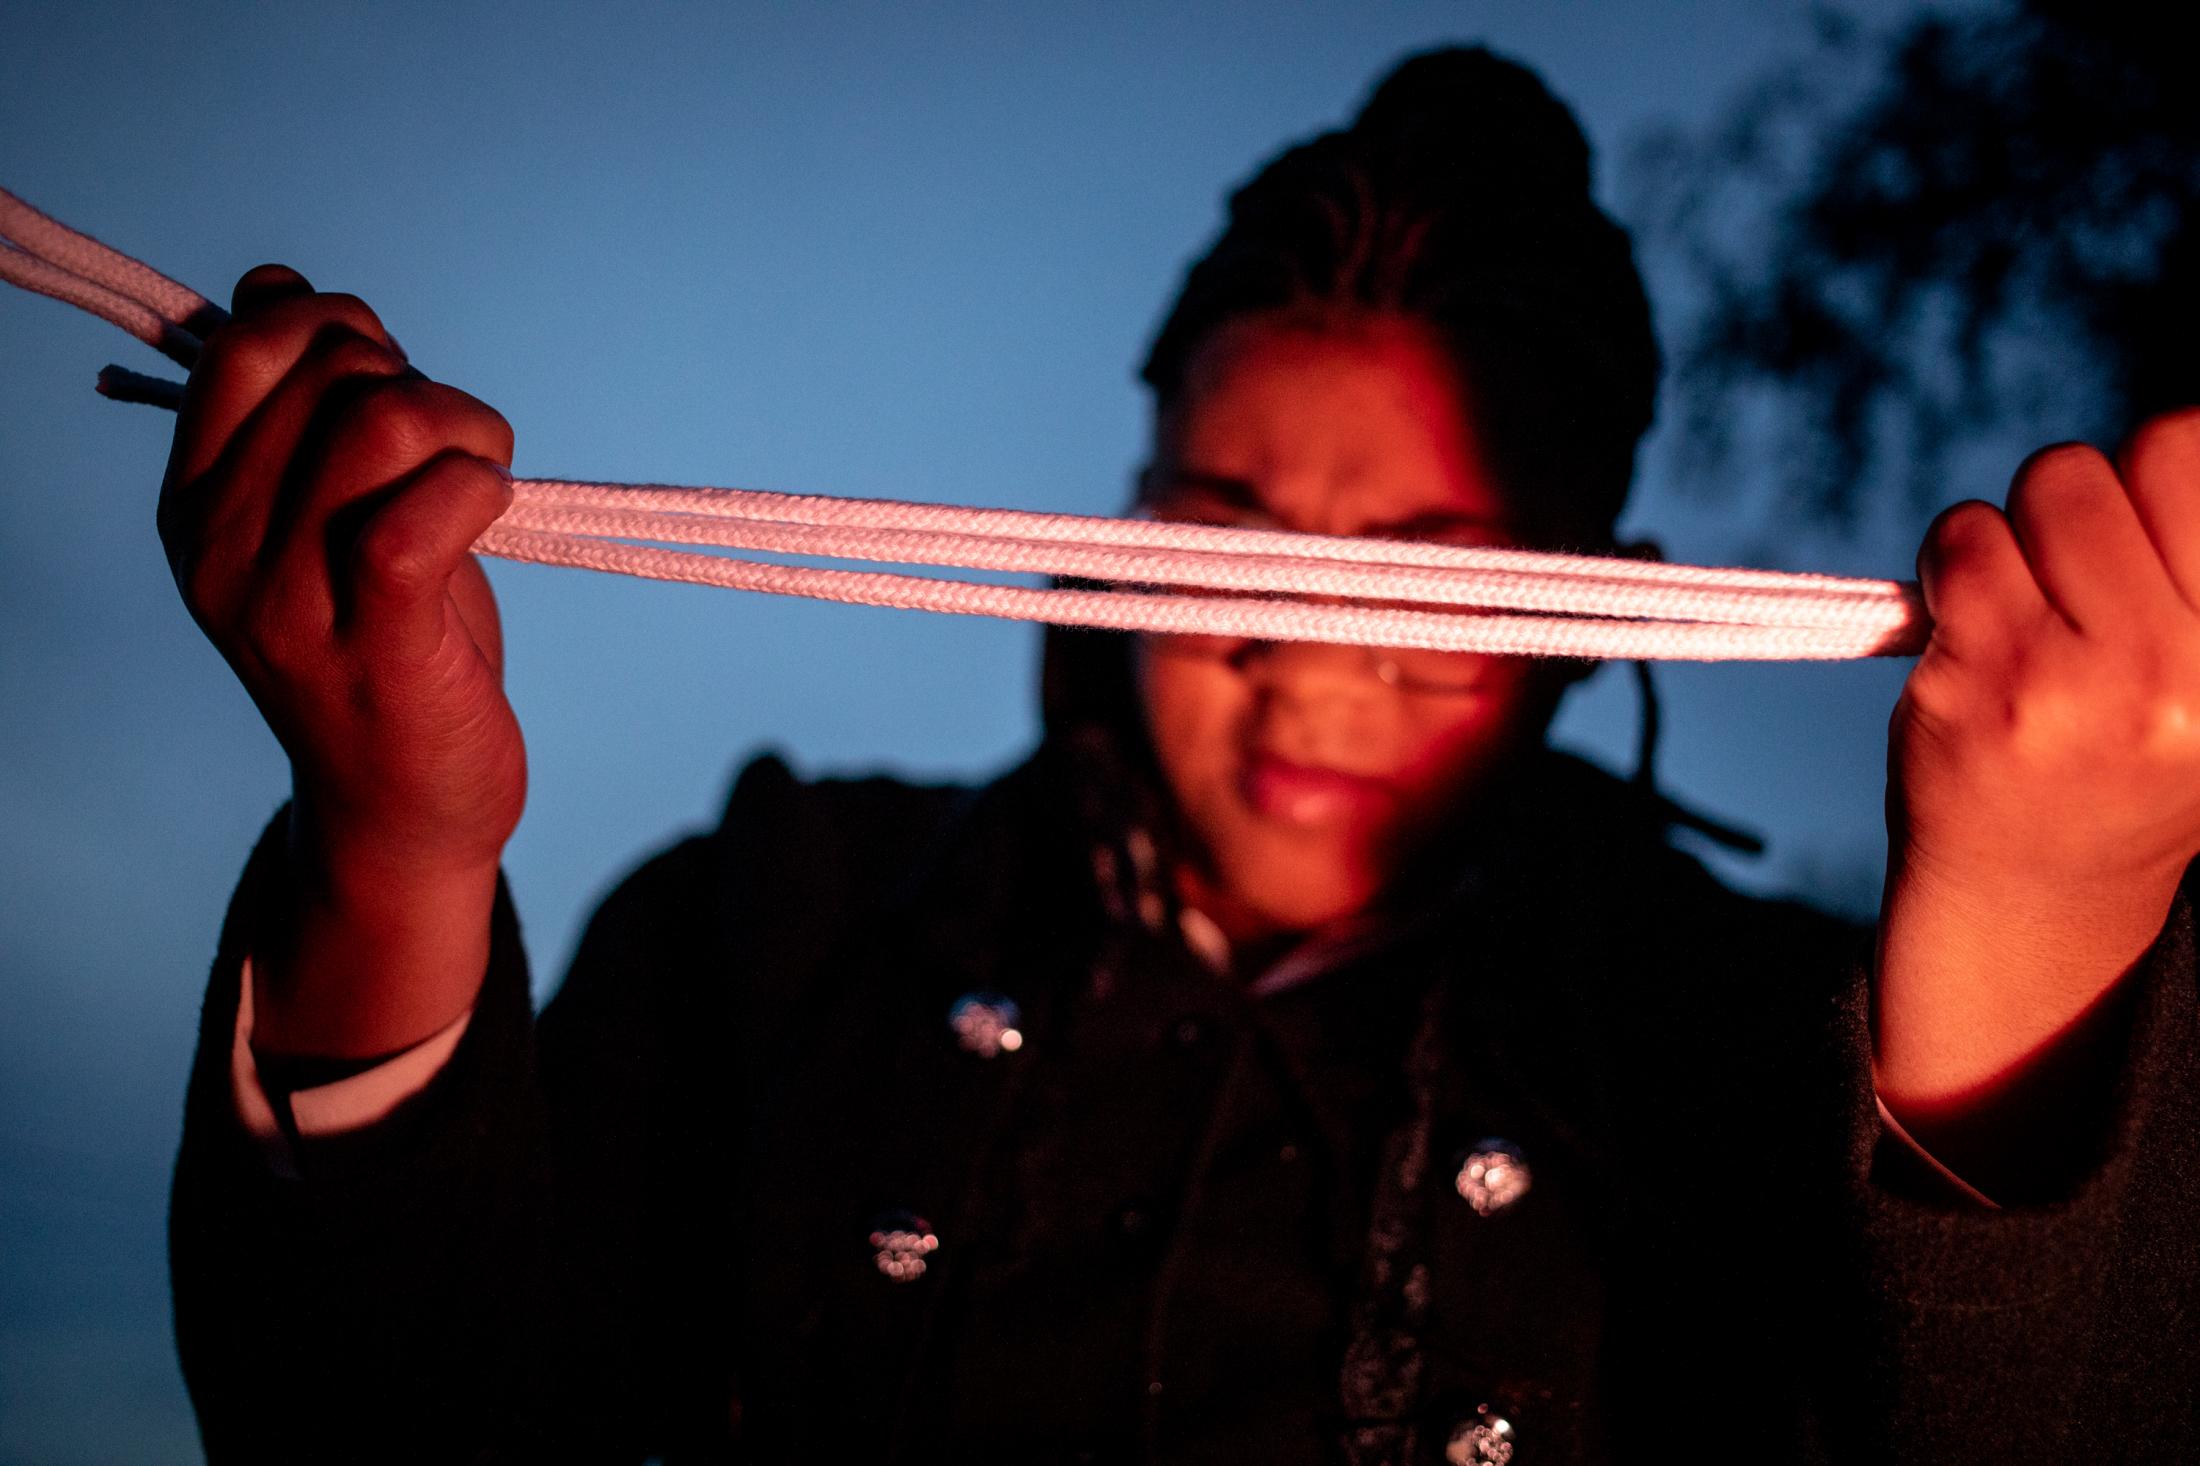 Break a Thread -  Leroya Sanford, 17, performs a trick with magic ropes at...